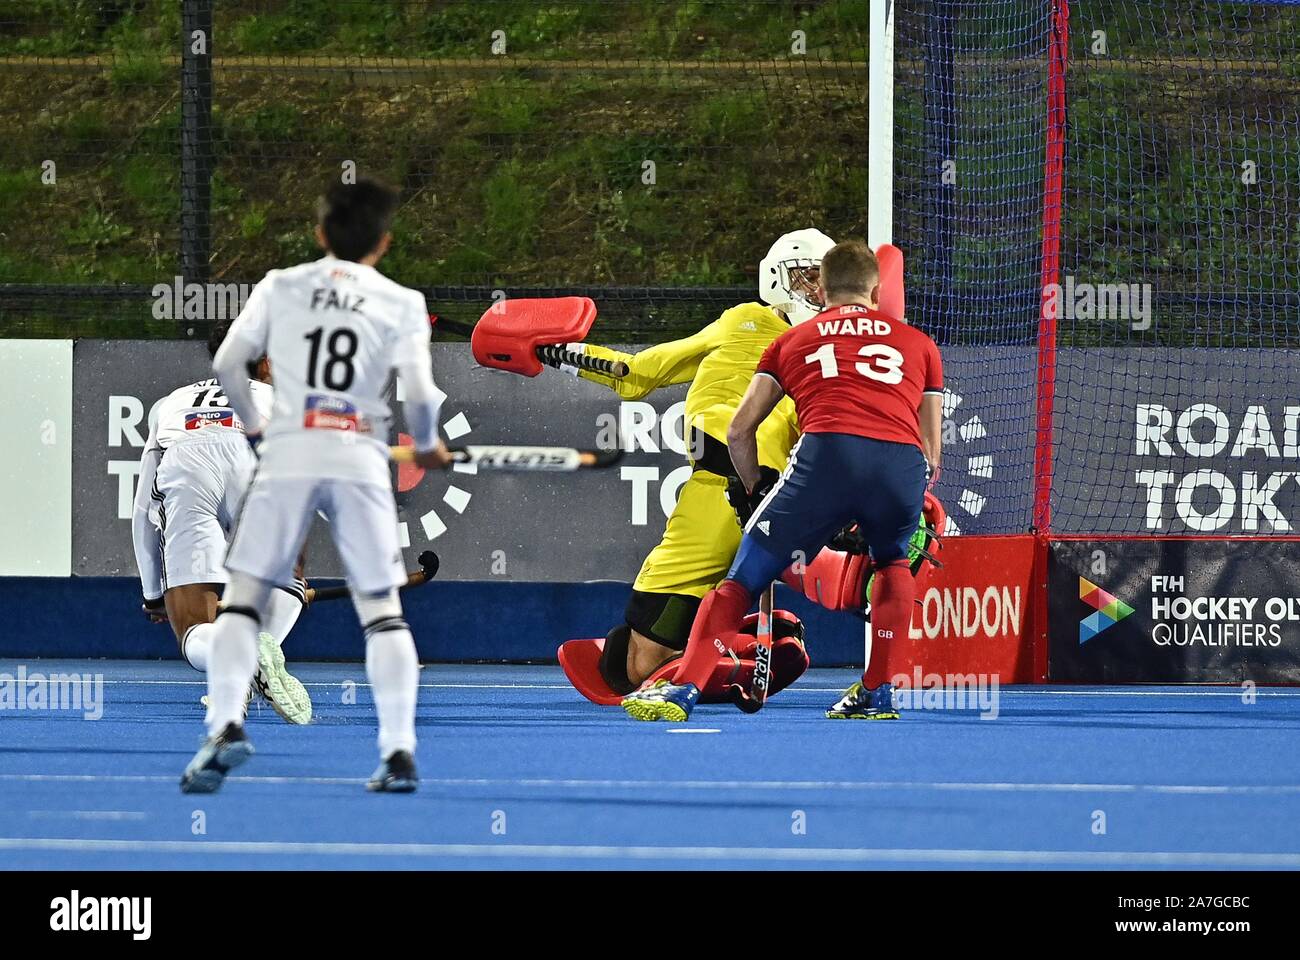 Stratford, United Kingdom. 02nd Nov, 2019. Nabil Noor (Malaysia, 15) scores the first goal. Great Britain v Malaysia. FIH Mens Olympic hockey qualifier. Lee Valley hockey and tennis centre. Stratford. London. United Kingdom. Credit Garry Bowden/Sport in Pictures/Alamy Live News. Credit: Sport In Pictures/Alamy Live News Stock Photo